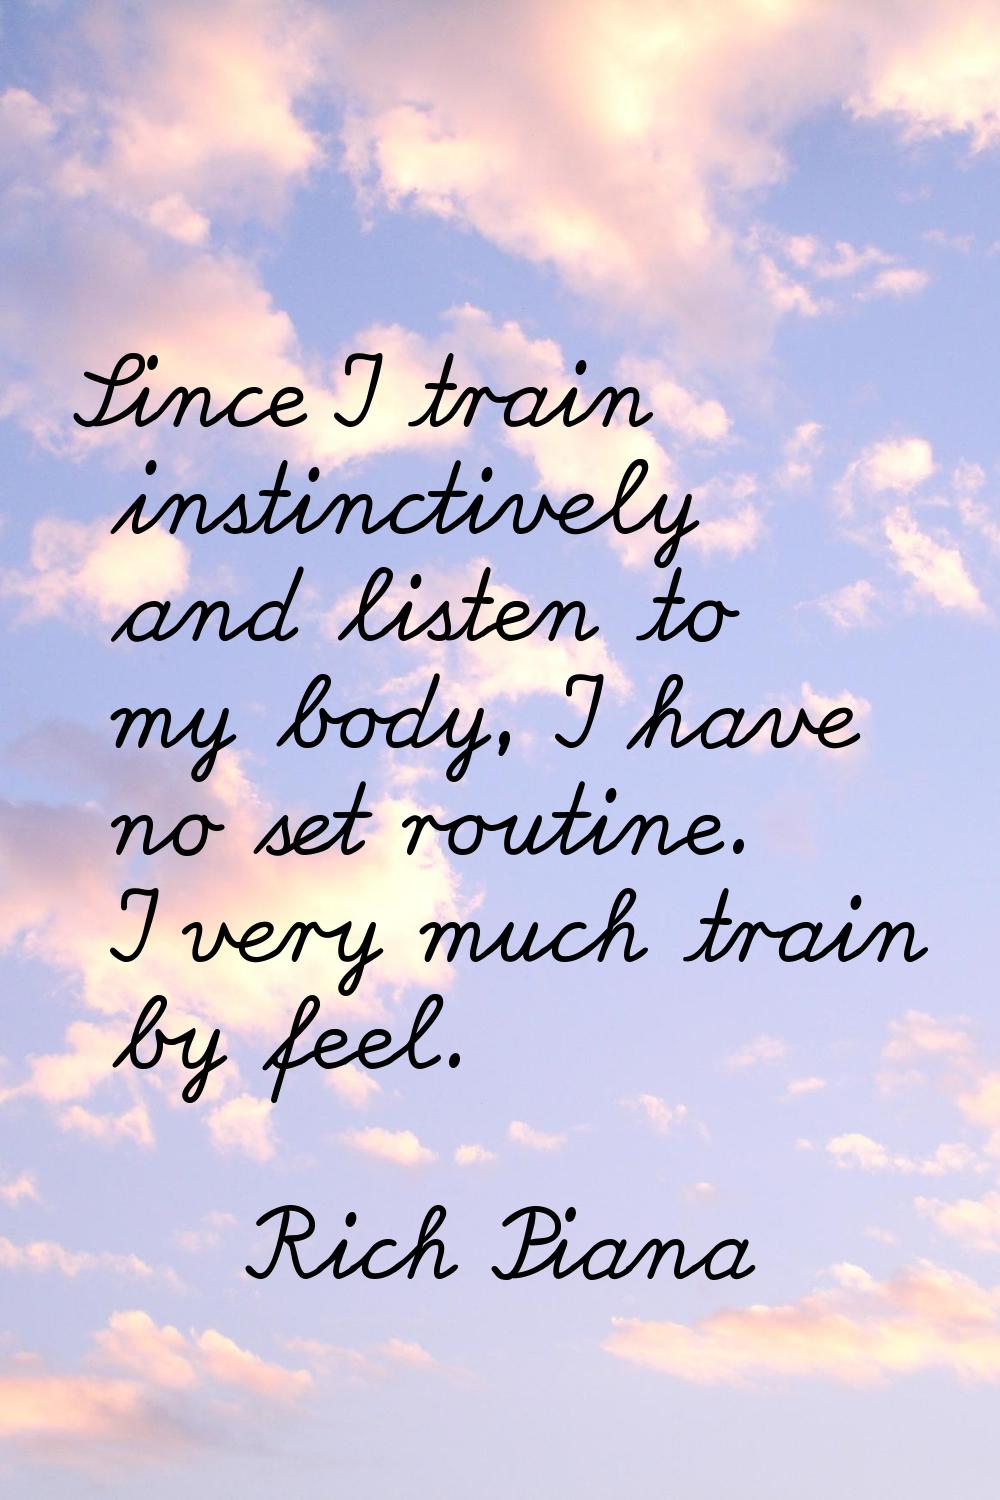 Since I train instinctively and listen to my body, I have no set routine. I very much train by feel